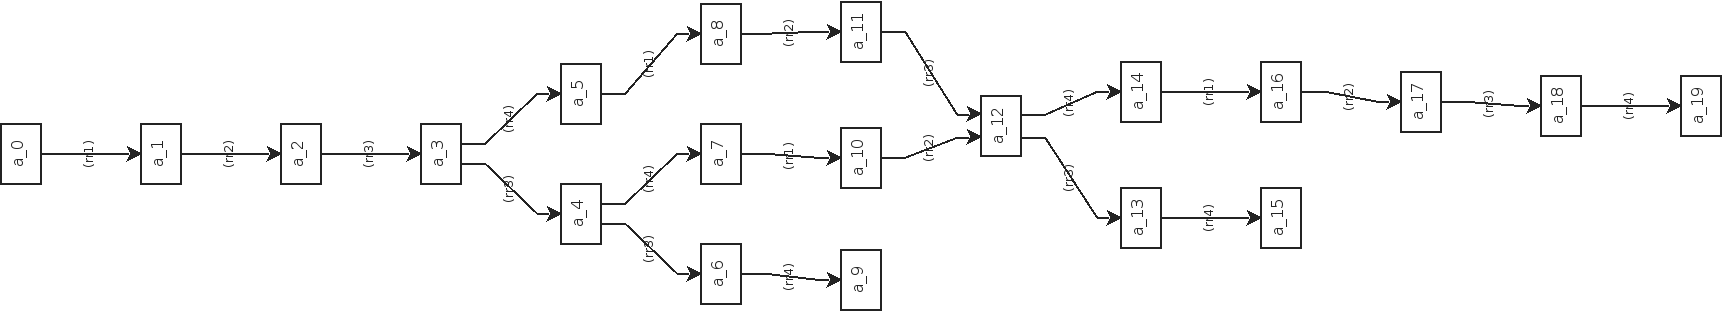 transition-system_or_reaction-graph